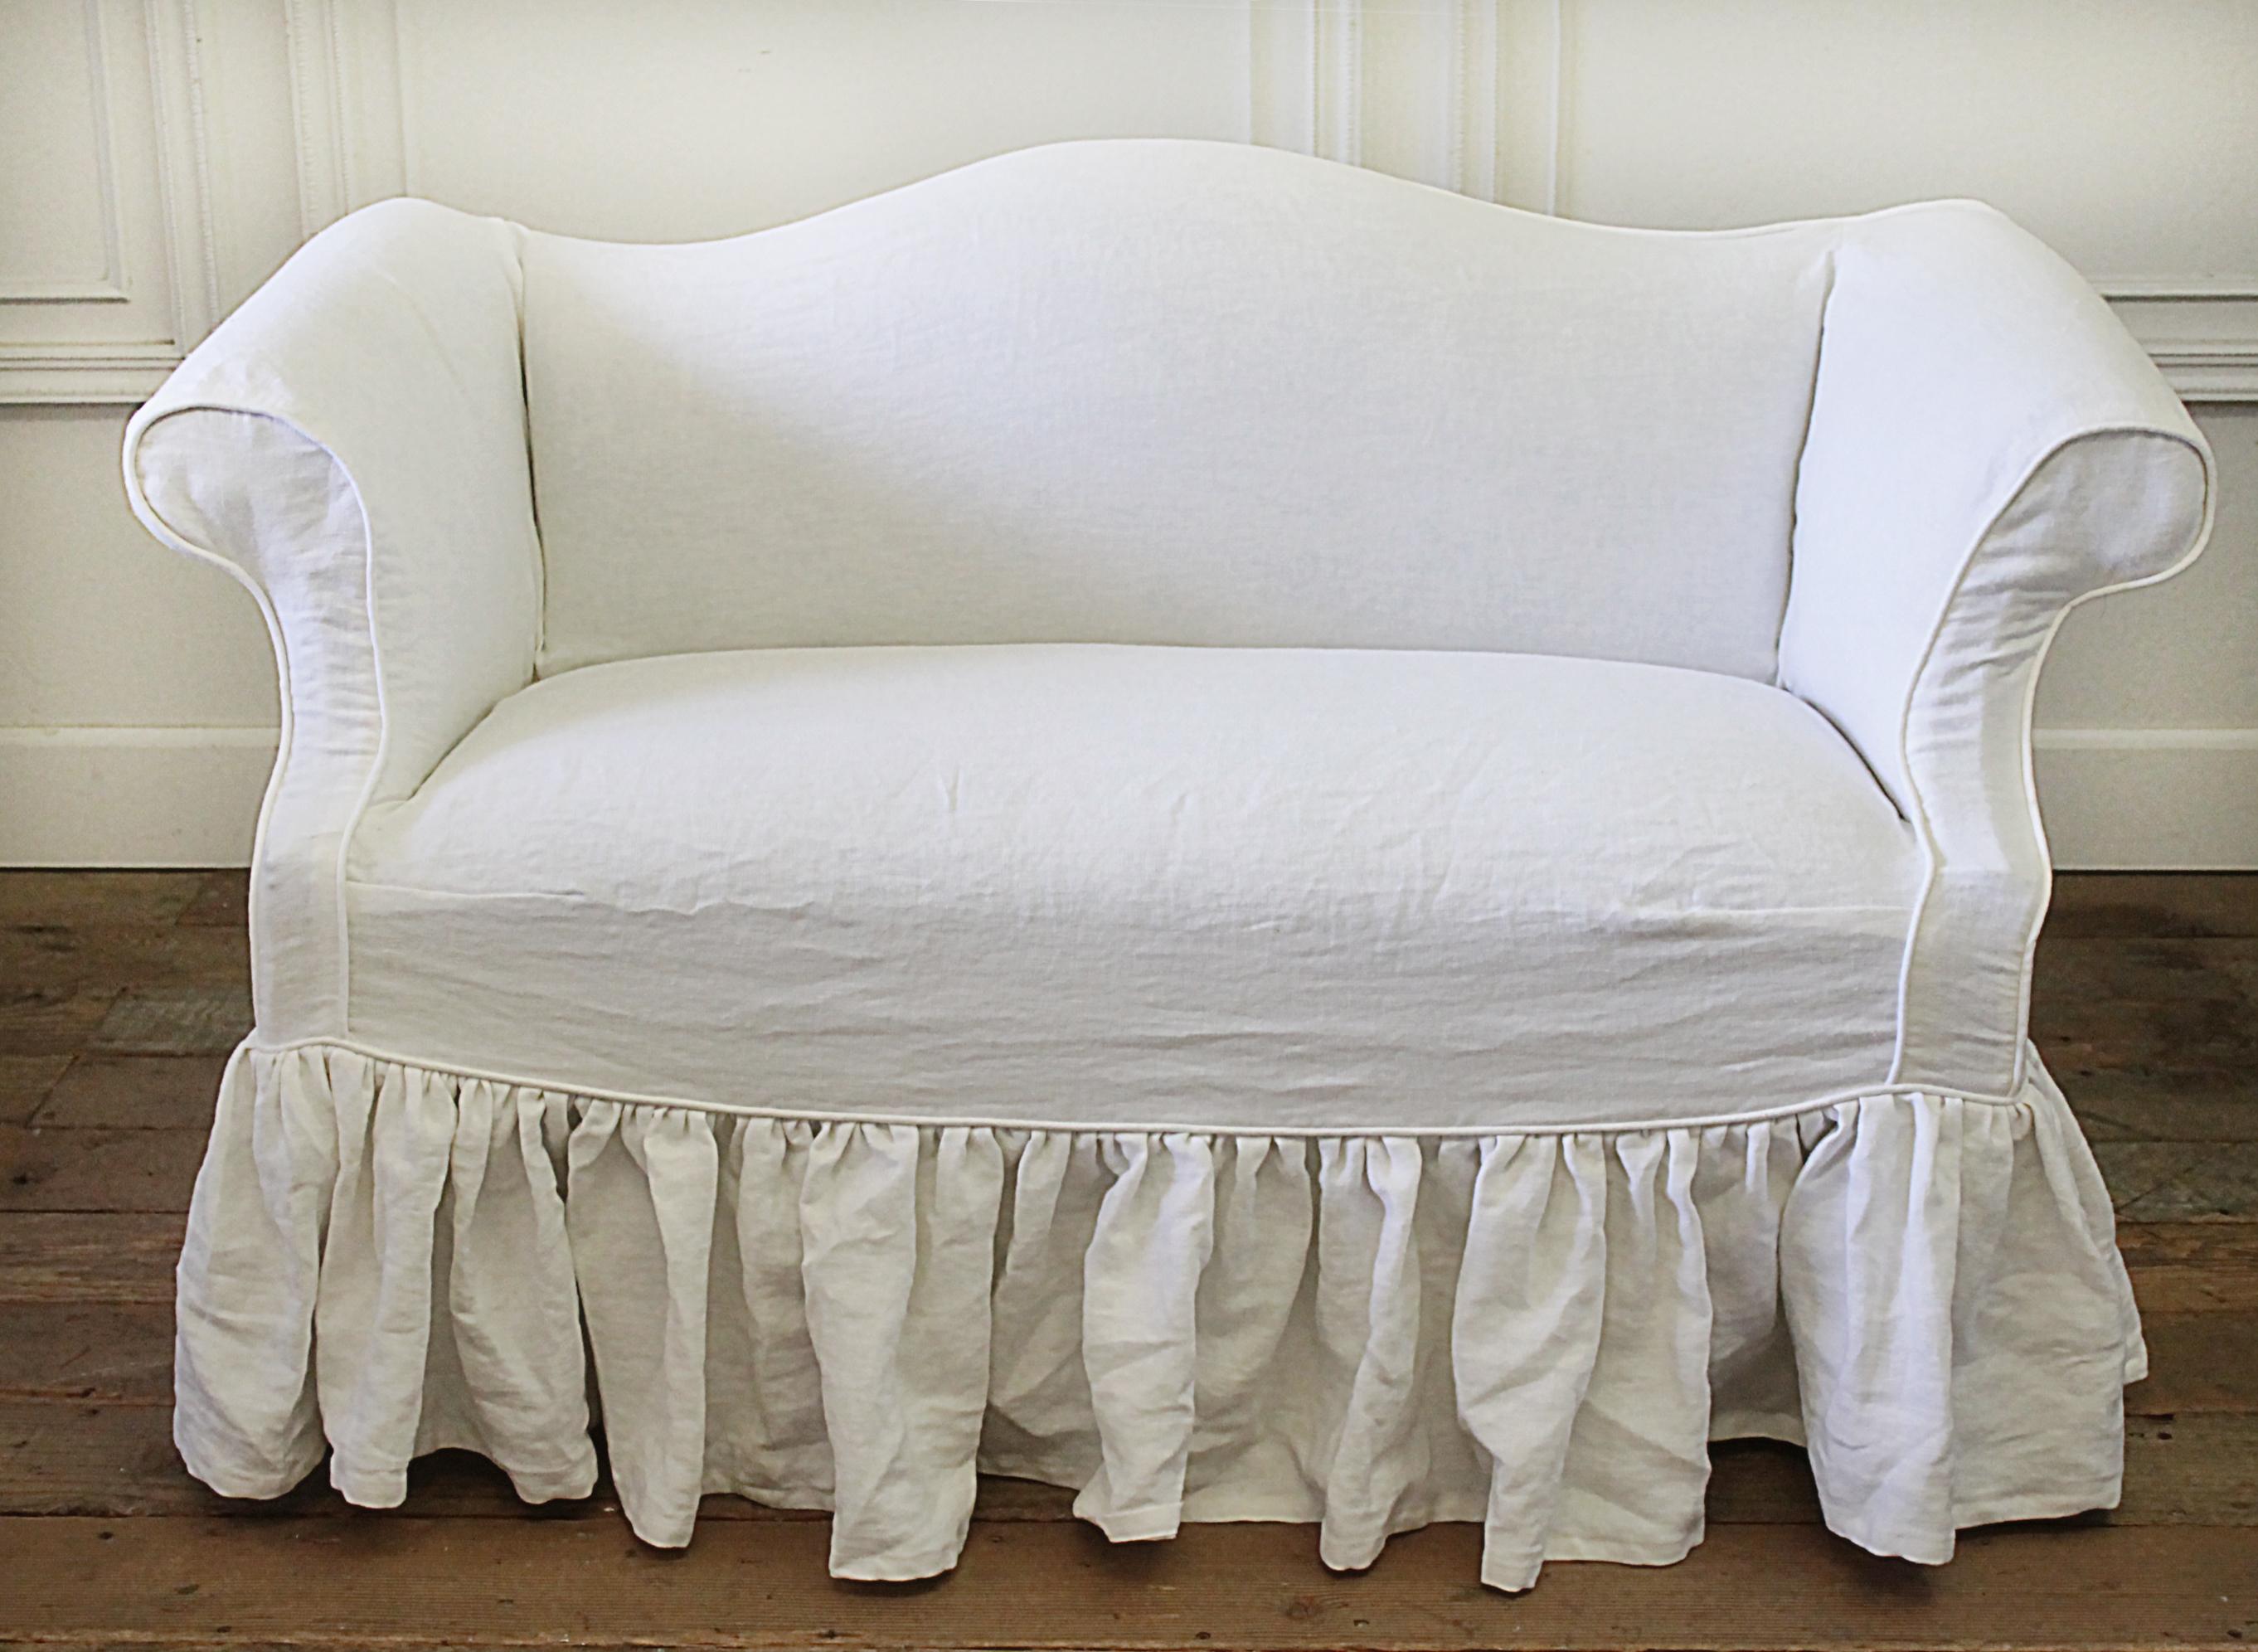 Custom linen slip covered vintage petite sofa in toile
Chippendale style petite bench or sofa, upholstery in a dark brown and natural toile.
We custom made a white Belgian linen slip cover with long ruffle drop. Our linen has been pre washed to